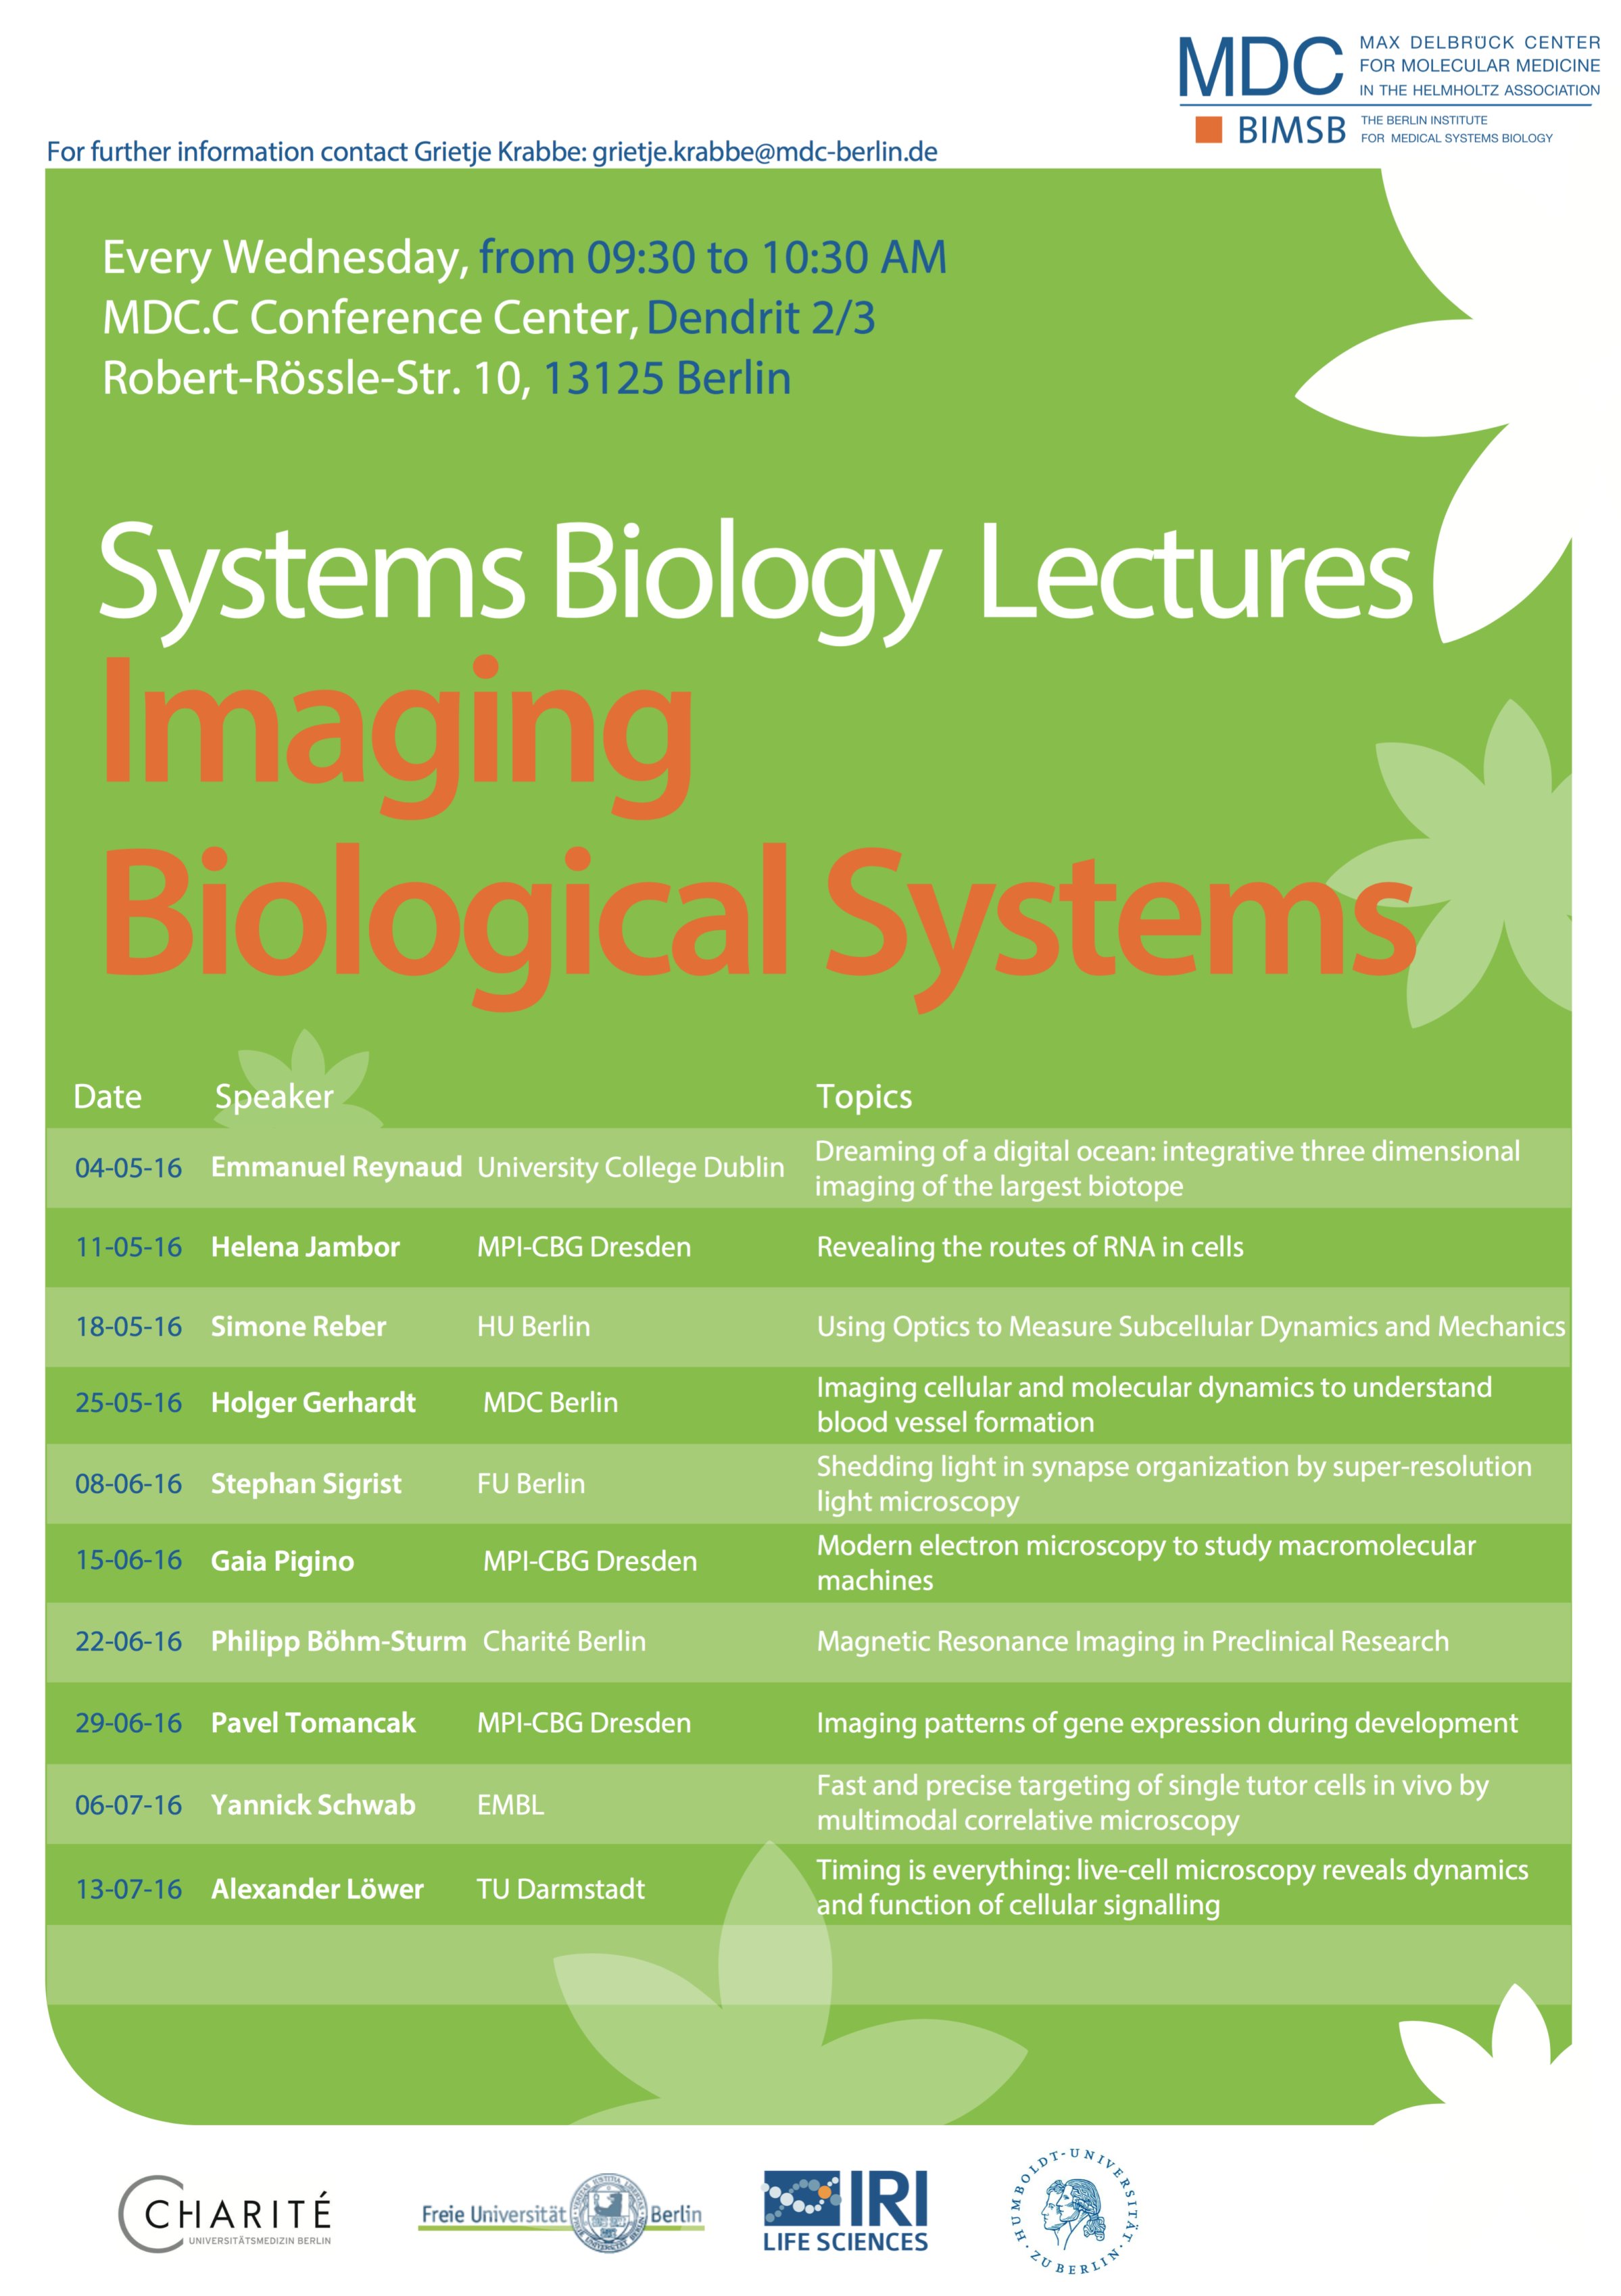 Overview of SysBio lecture